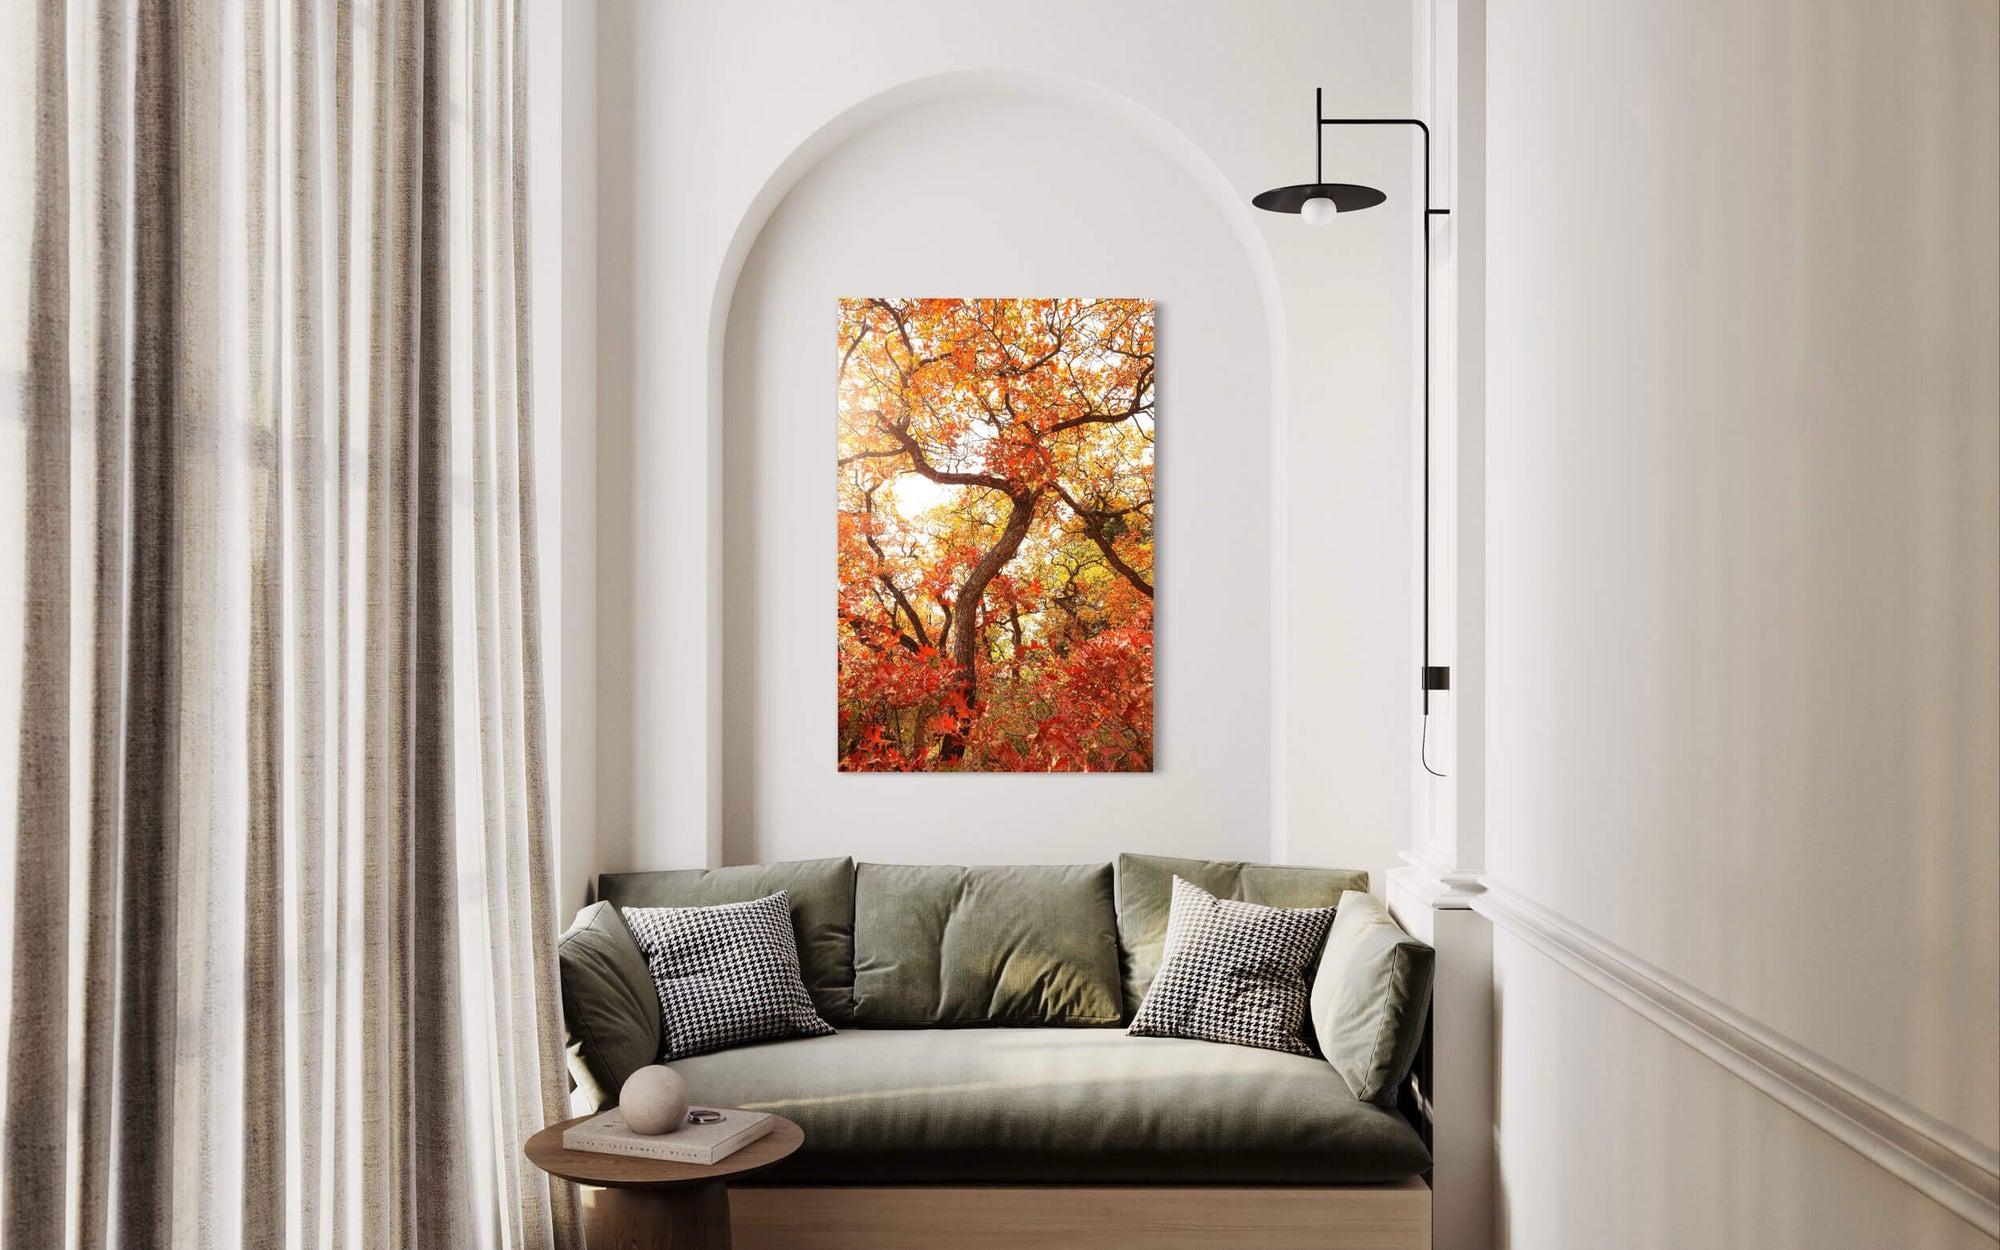 A piece of Colorado art showing the beautiful Ouray fall colors hangs in a living room.